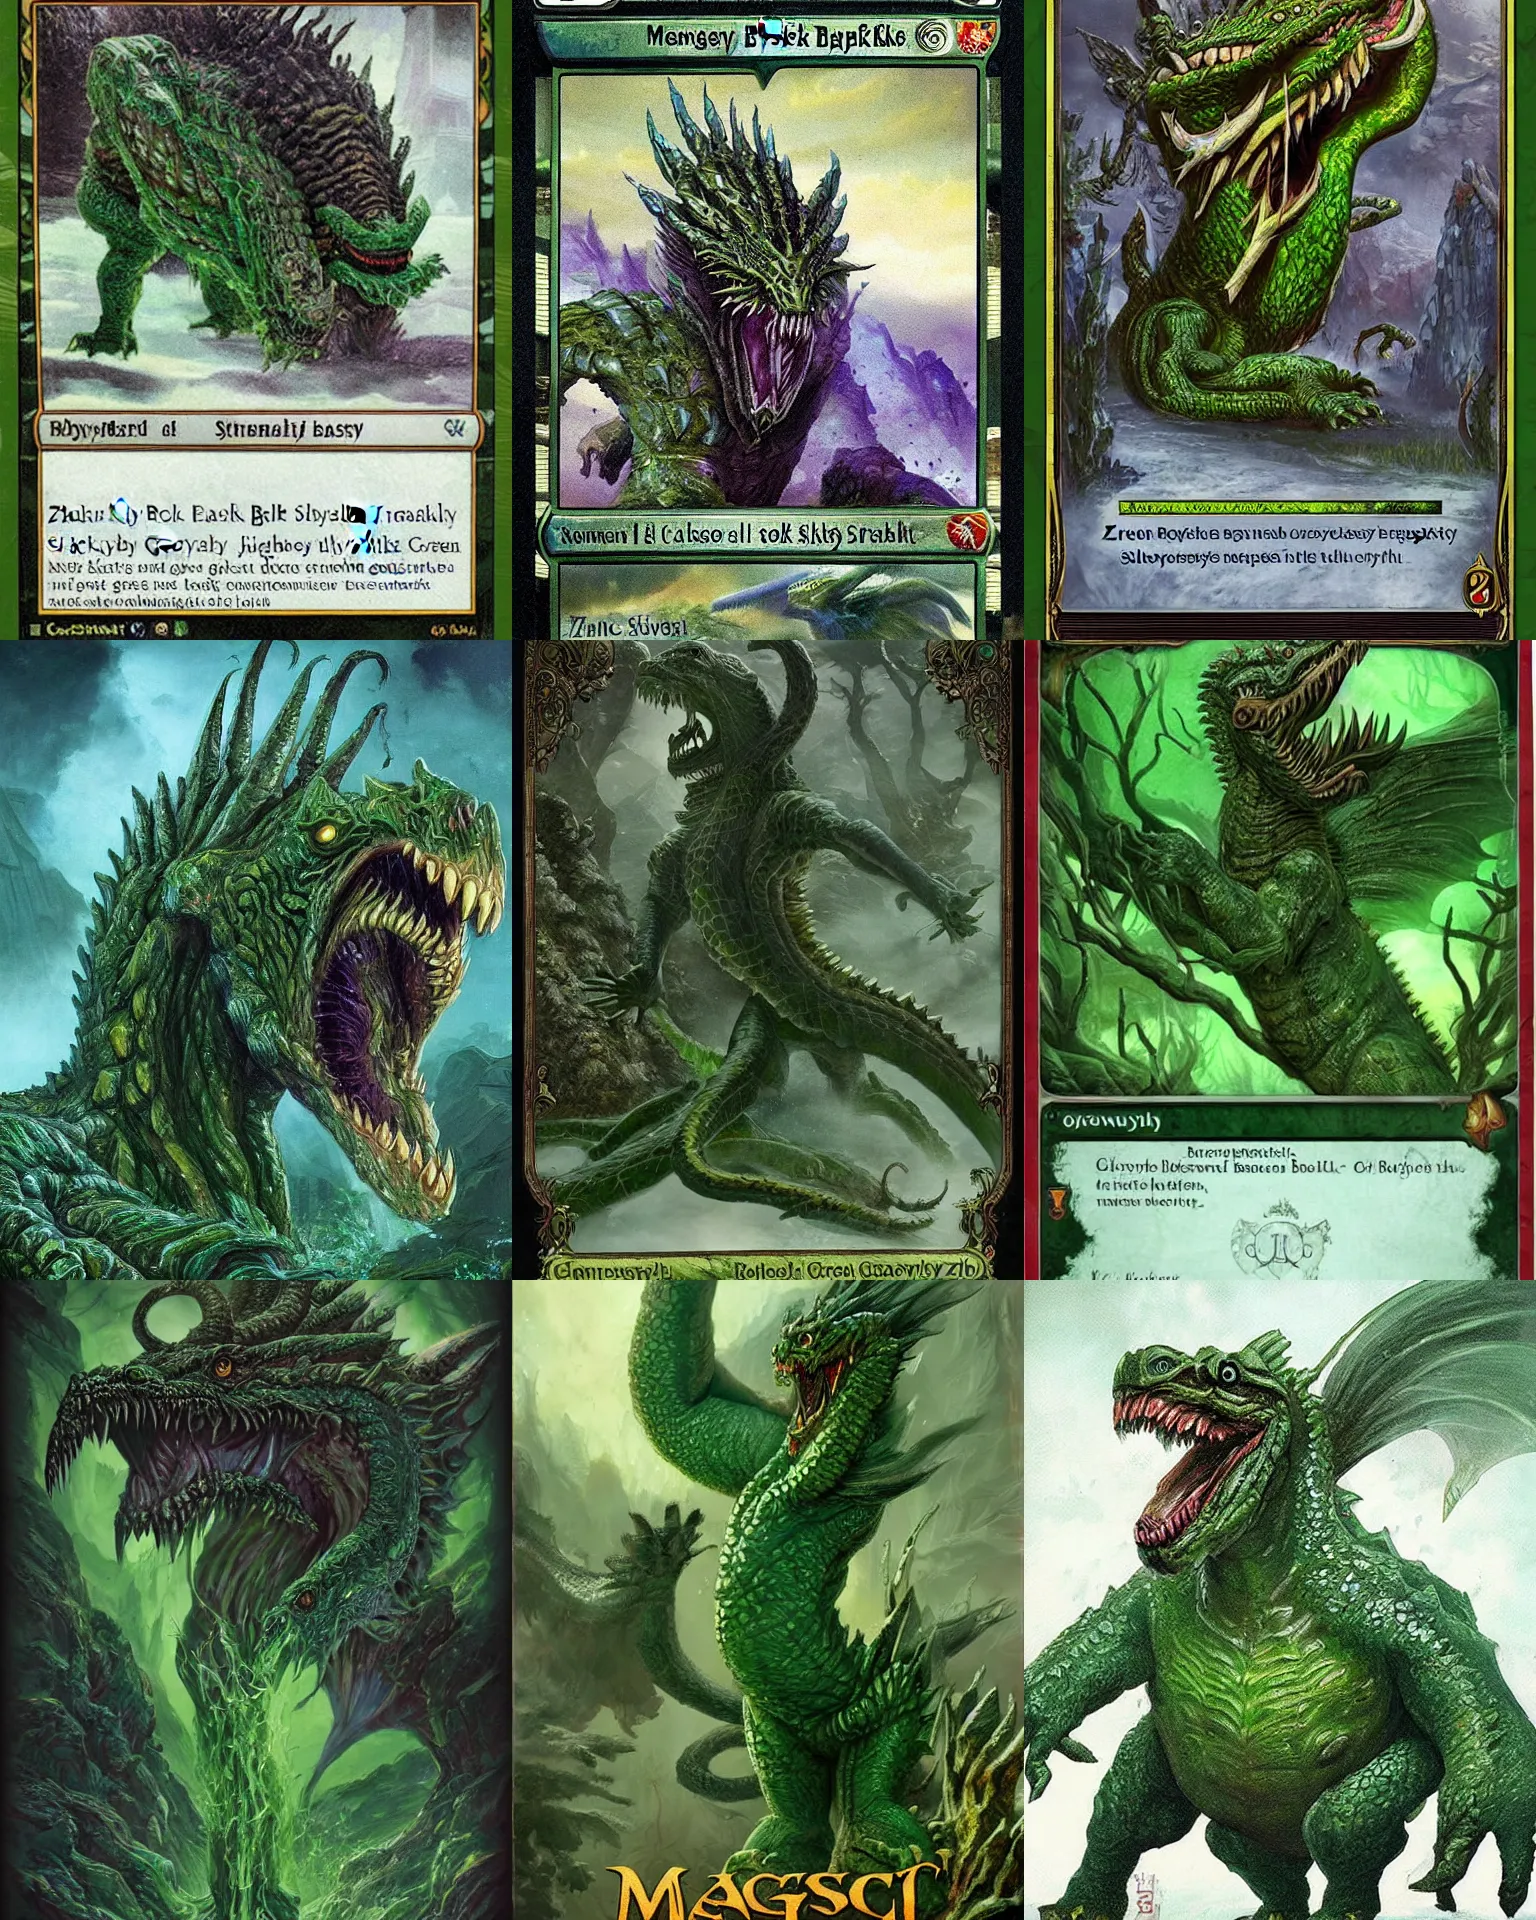 Prompt: a giant monster epic royal basilisk zmej gorynych, slavic fairy - tale mythological green creature, magic : the gathering